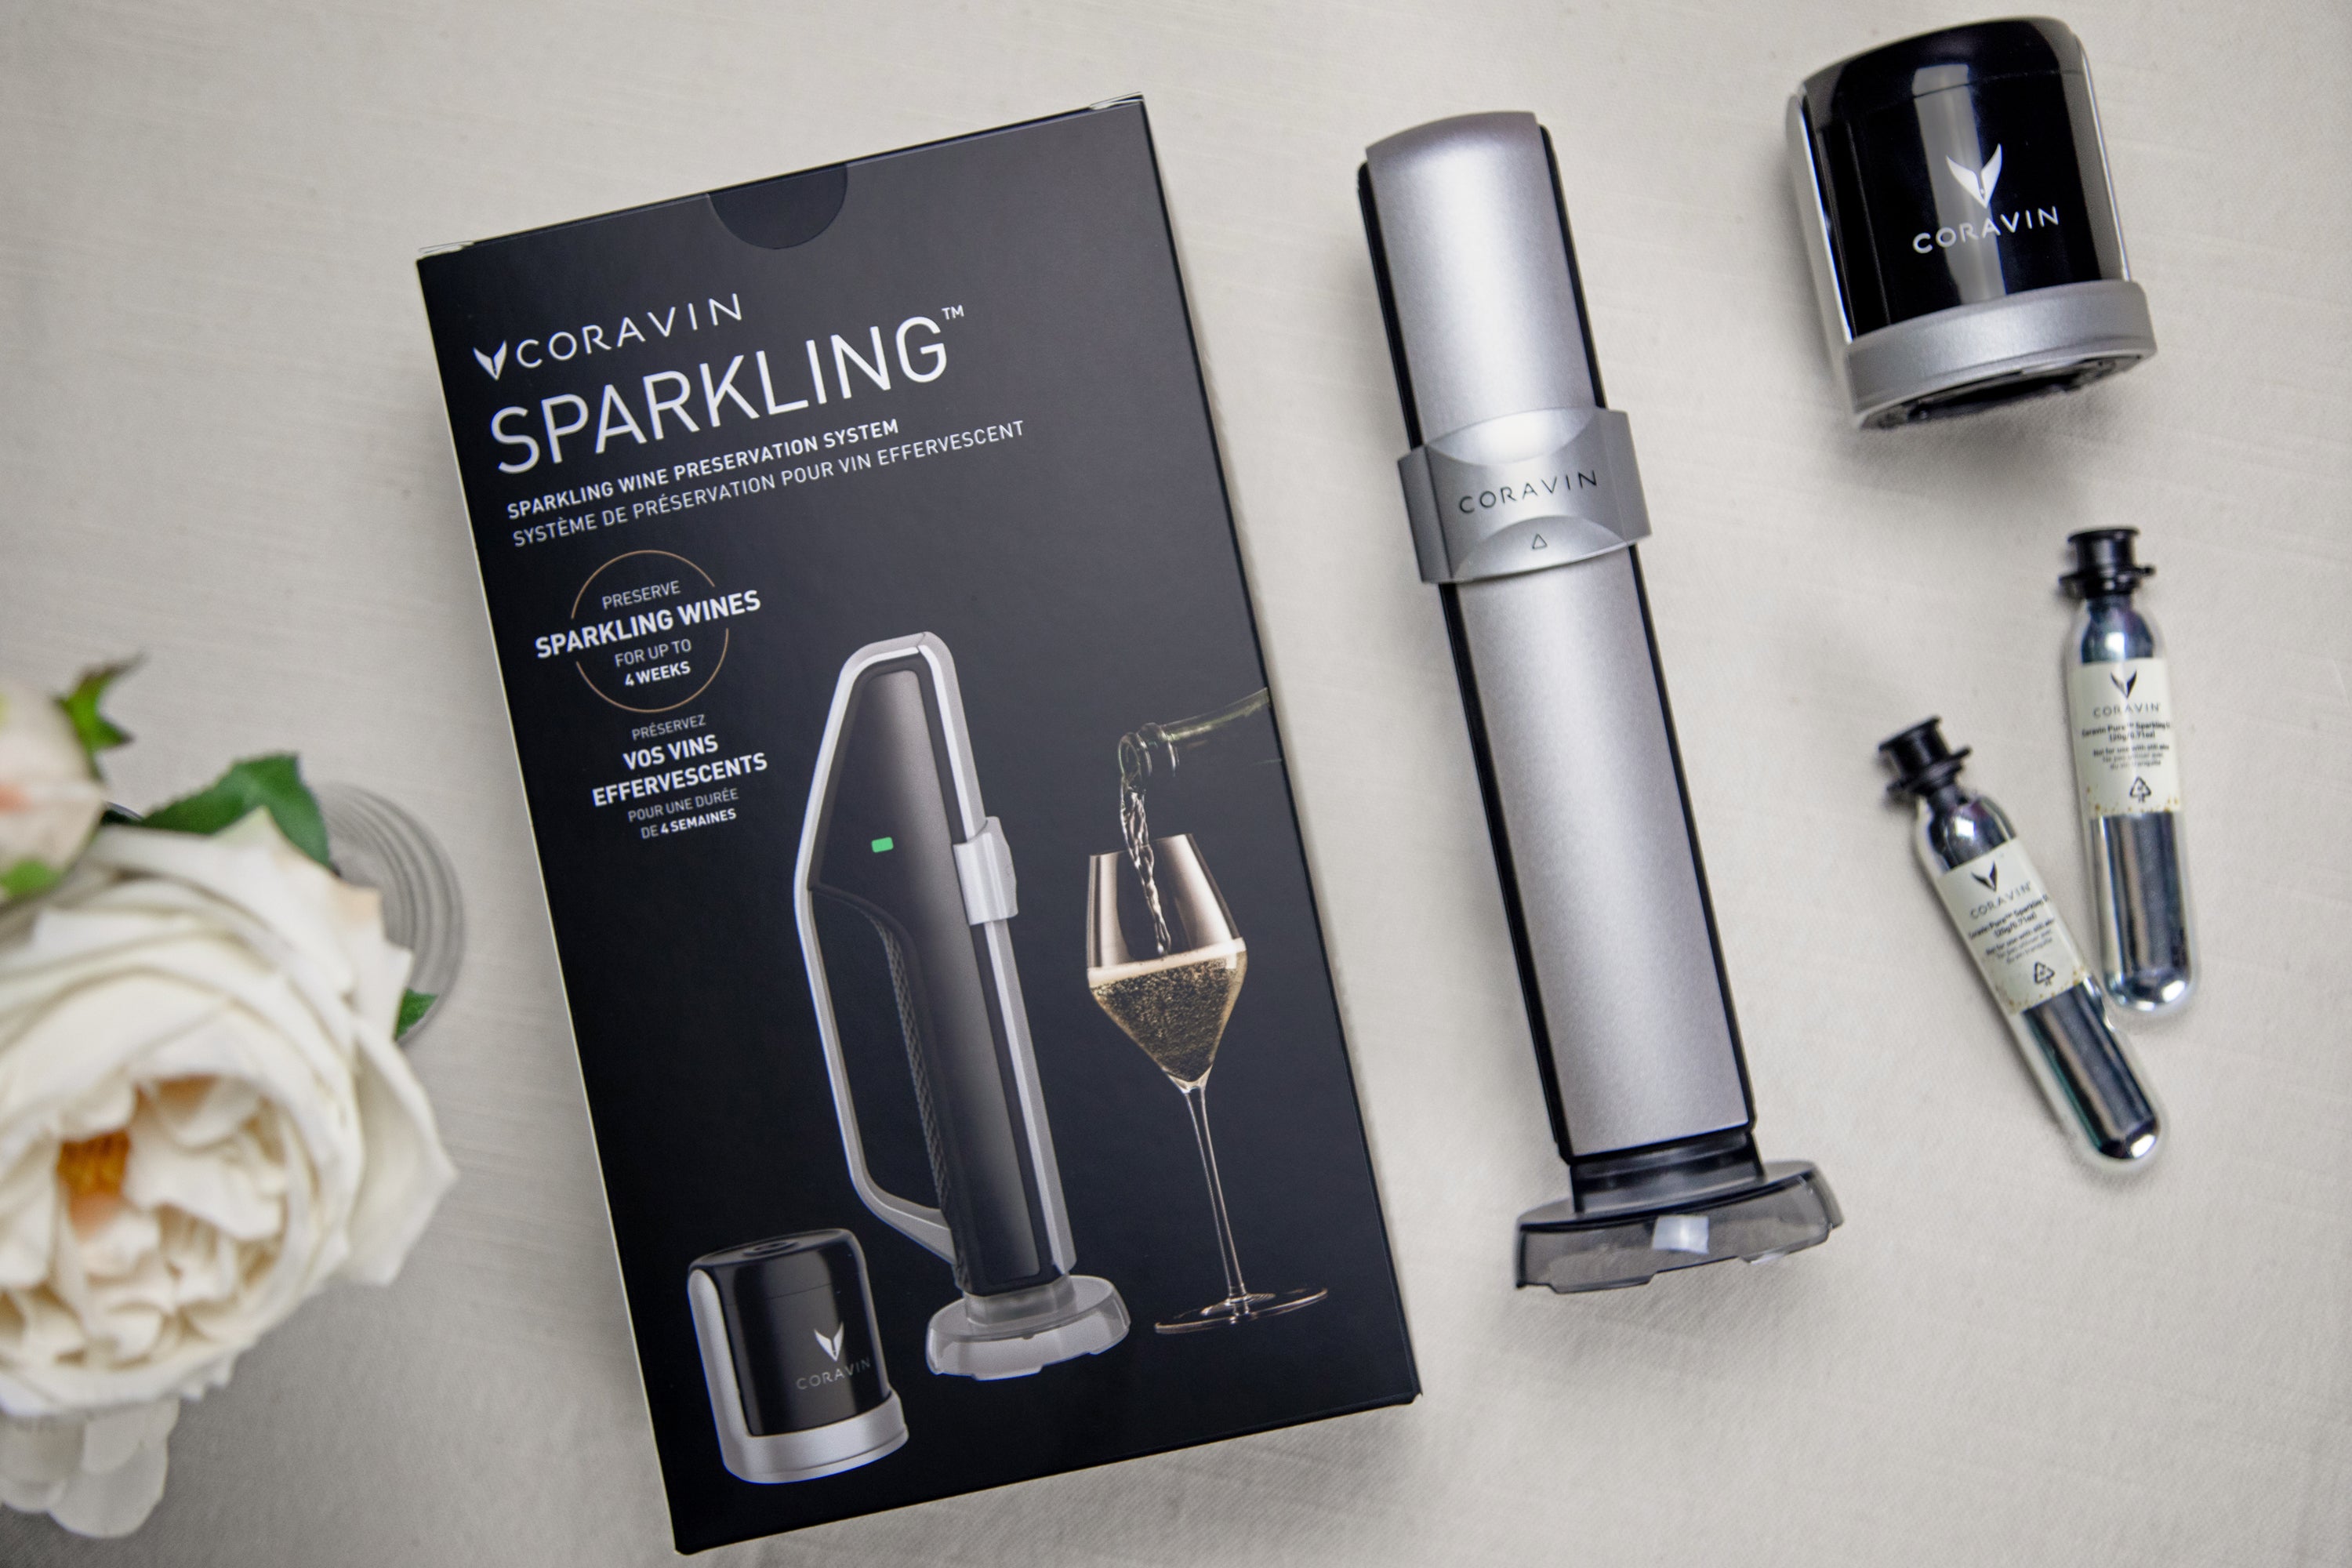 Coravin Sparkling device unboxed on the table